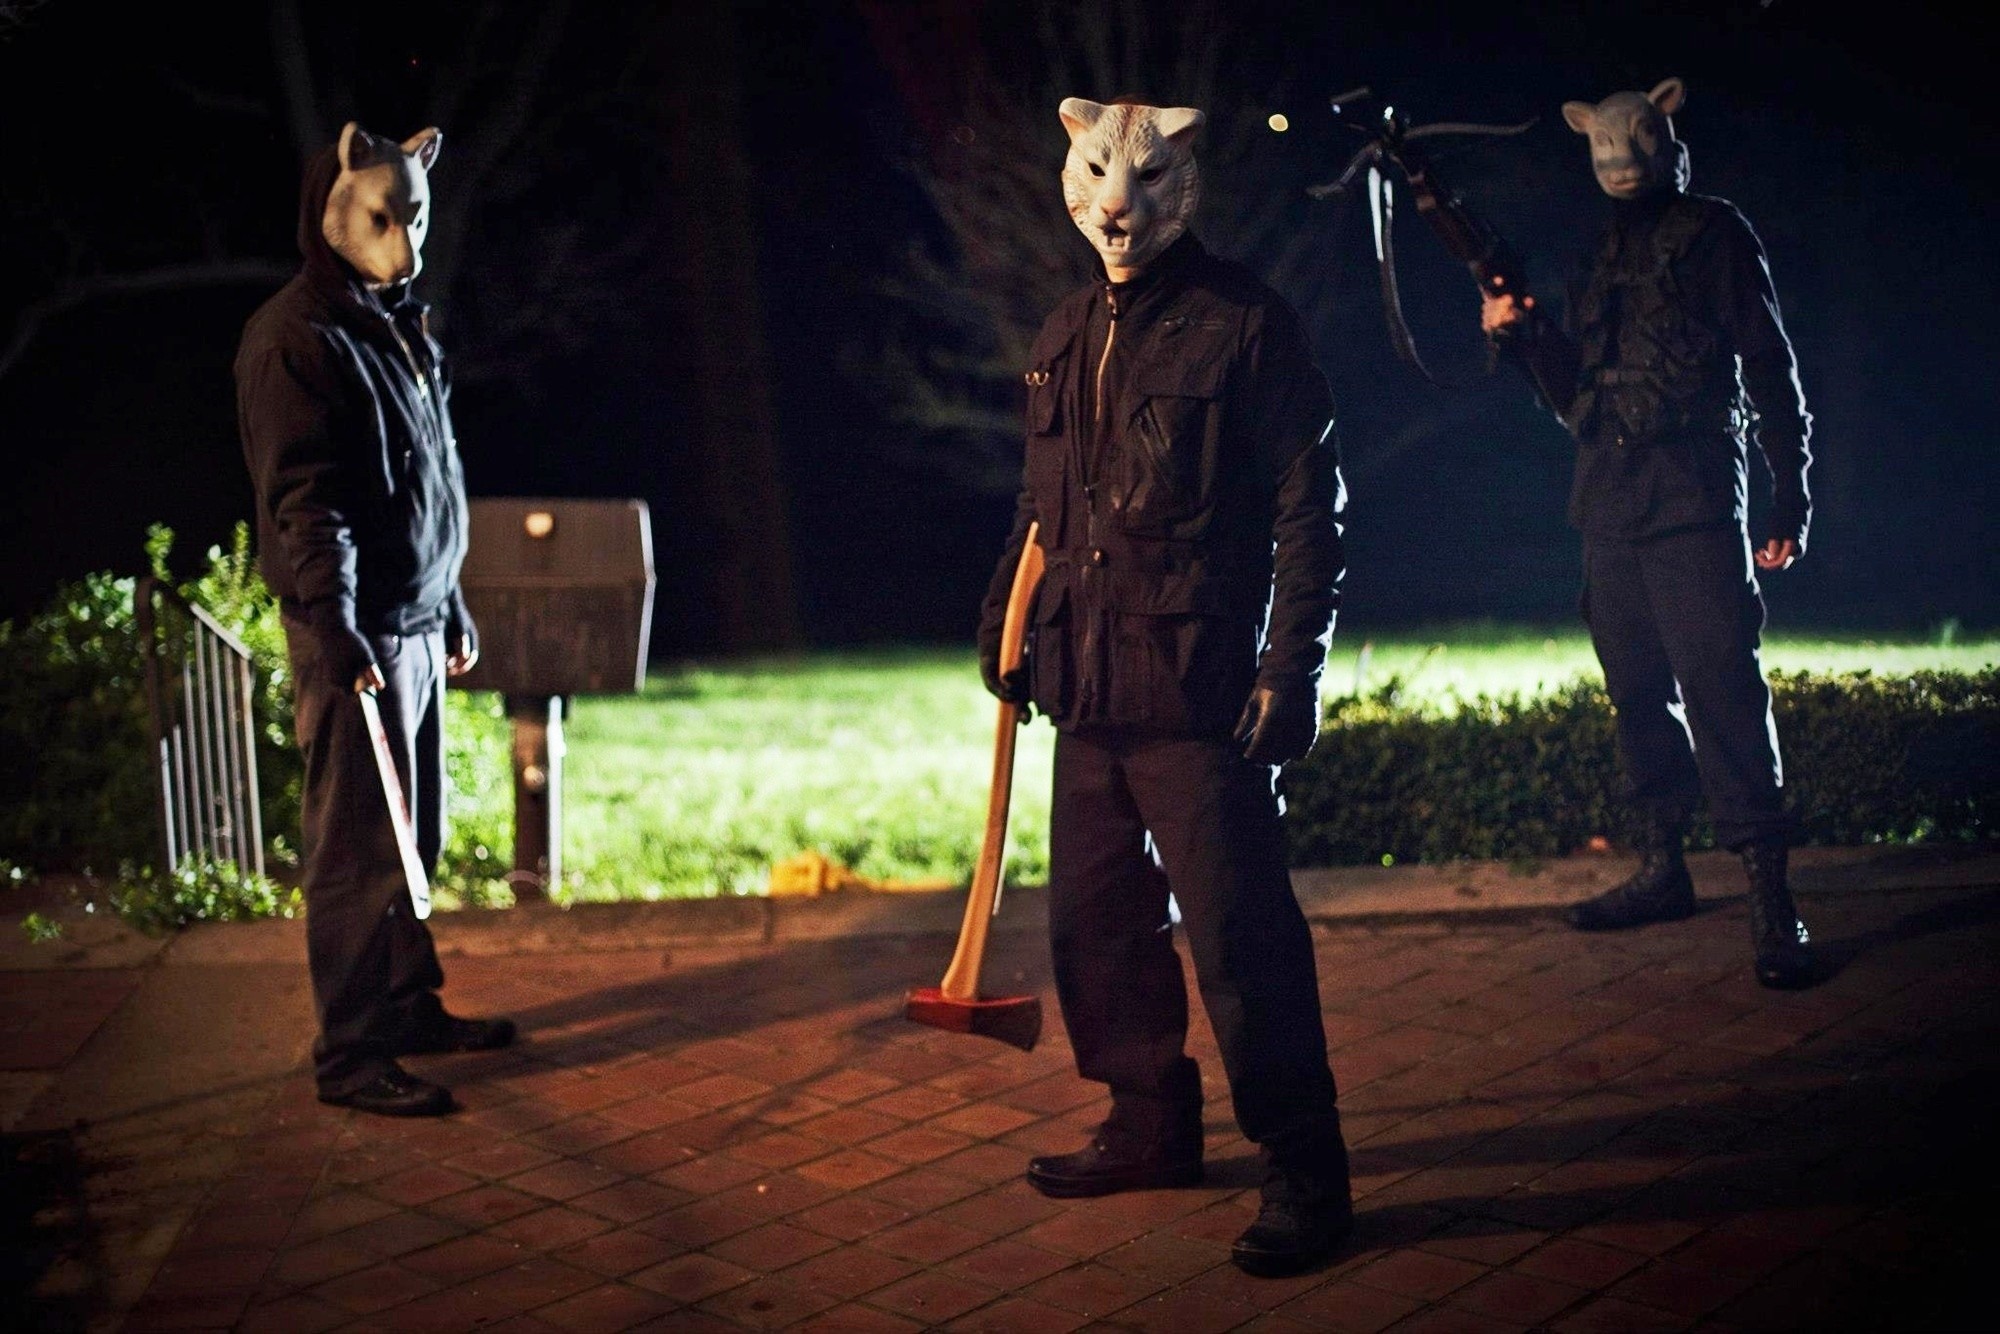 A scene from Lionsgate Films' You're Next (2013)